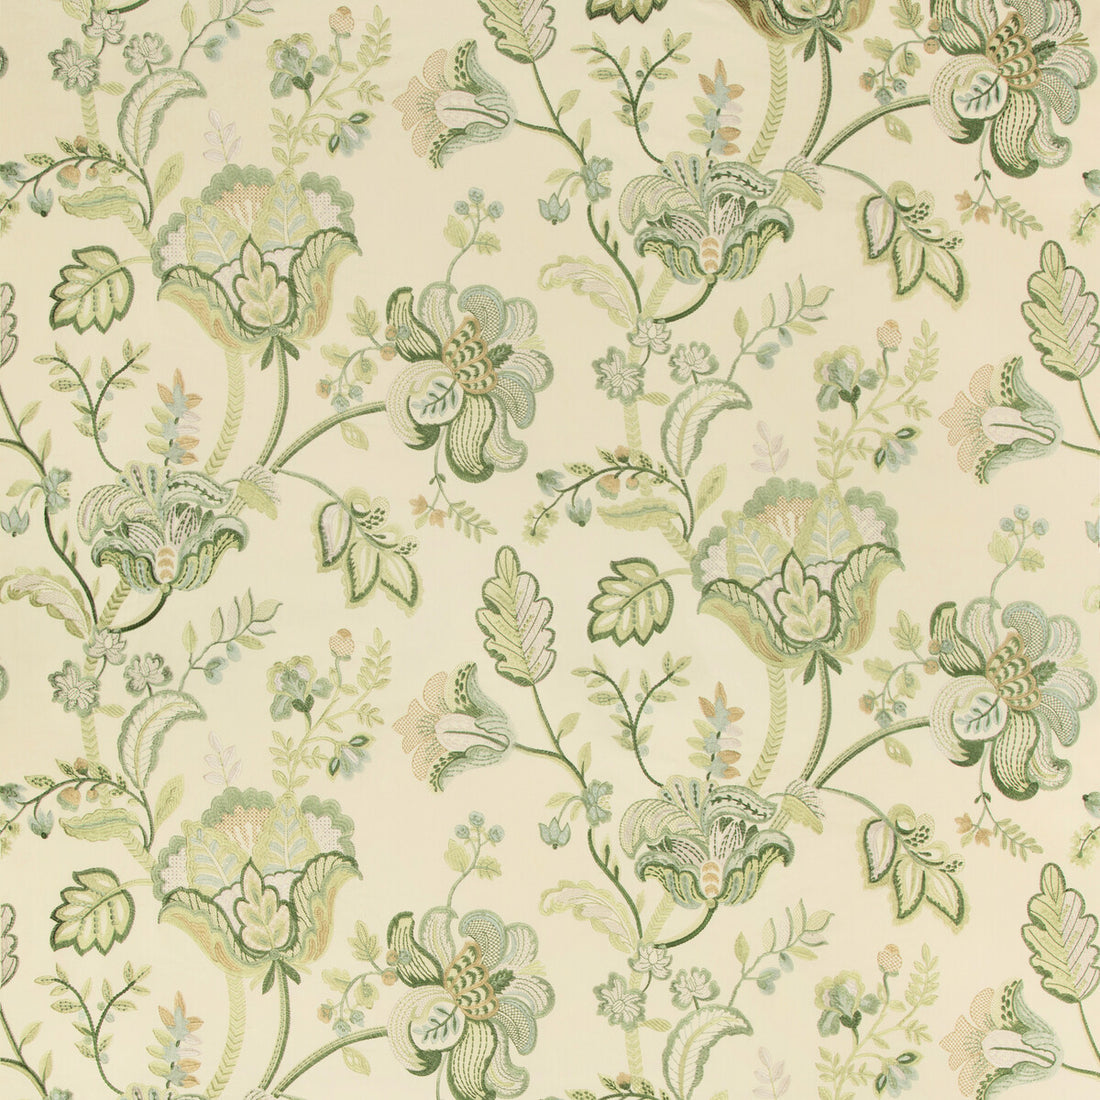 Bradford Emb fabric in greenery color - pattern 2017174.233.0 - by Lee Jofa in the Westport collection